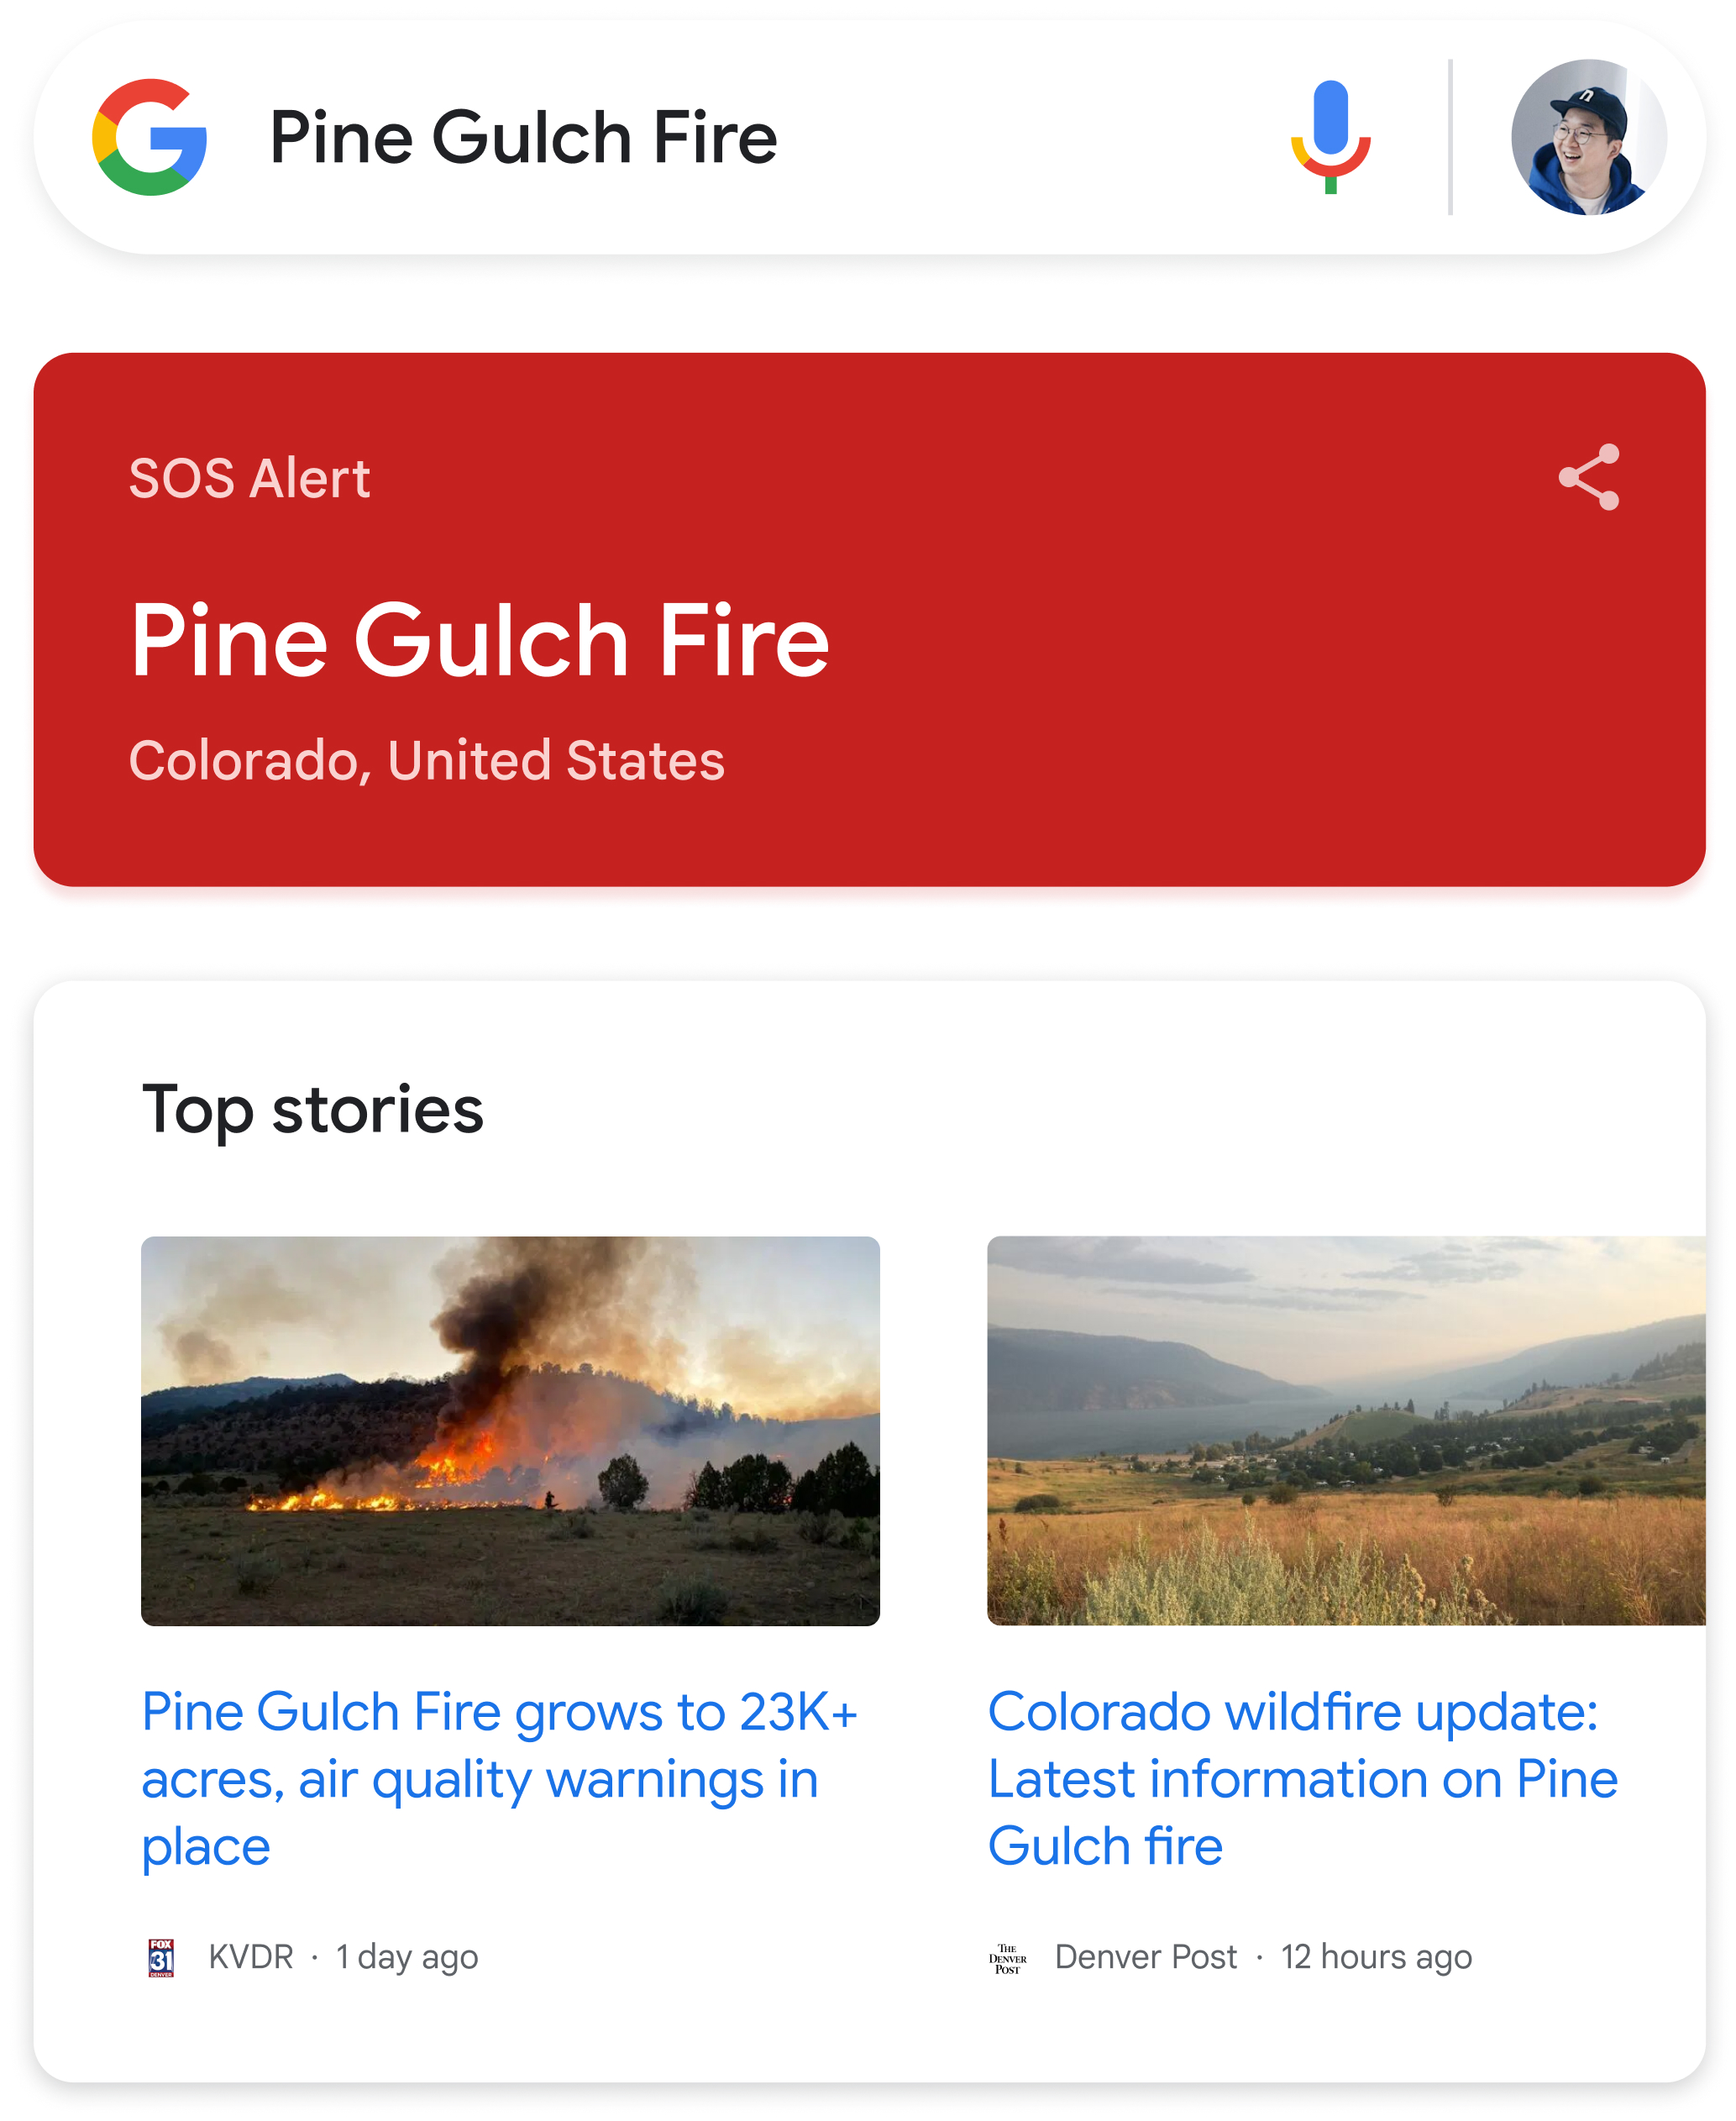 Google Search bar with query 'Pine Gulch Fire'